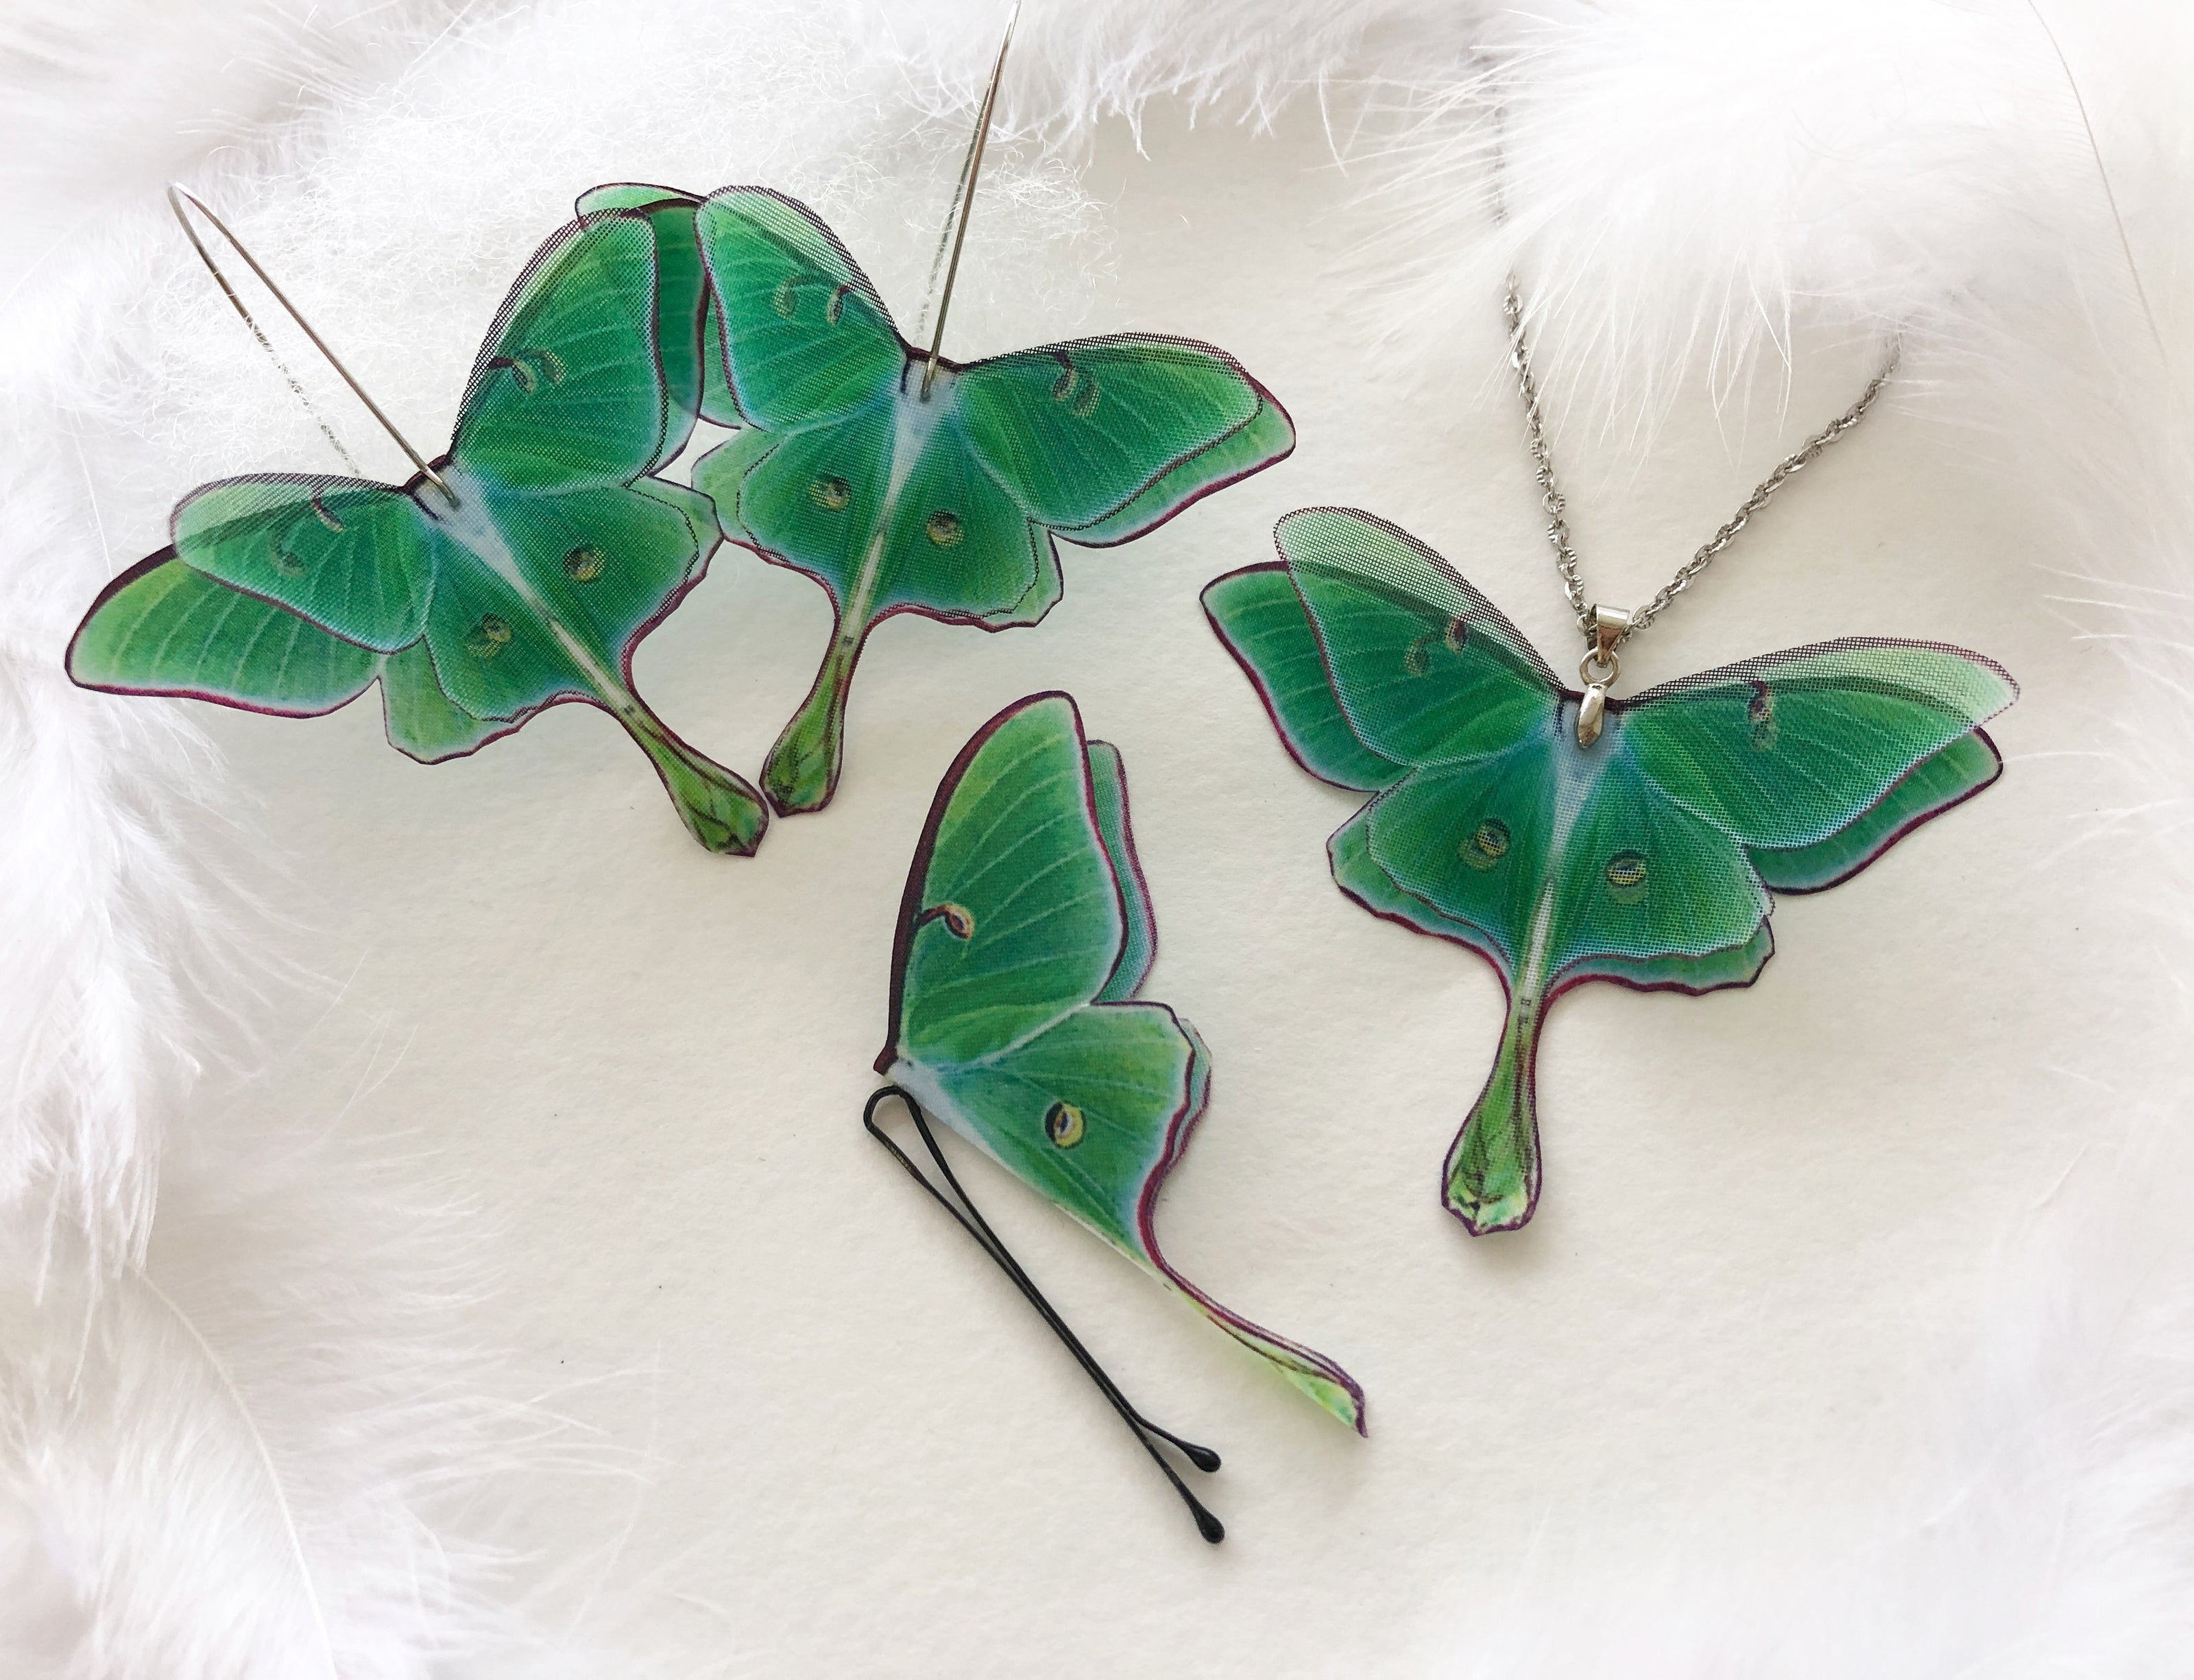 Hand made luna moth gift set for anyone who love butterflies and moths with fast shipping from the USA